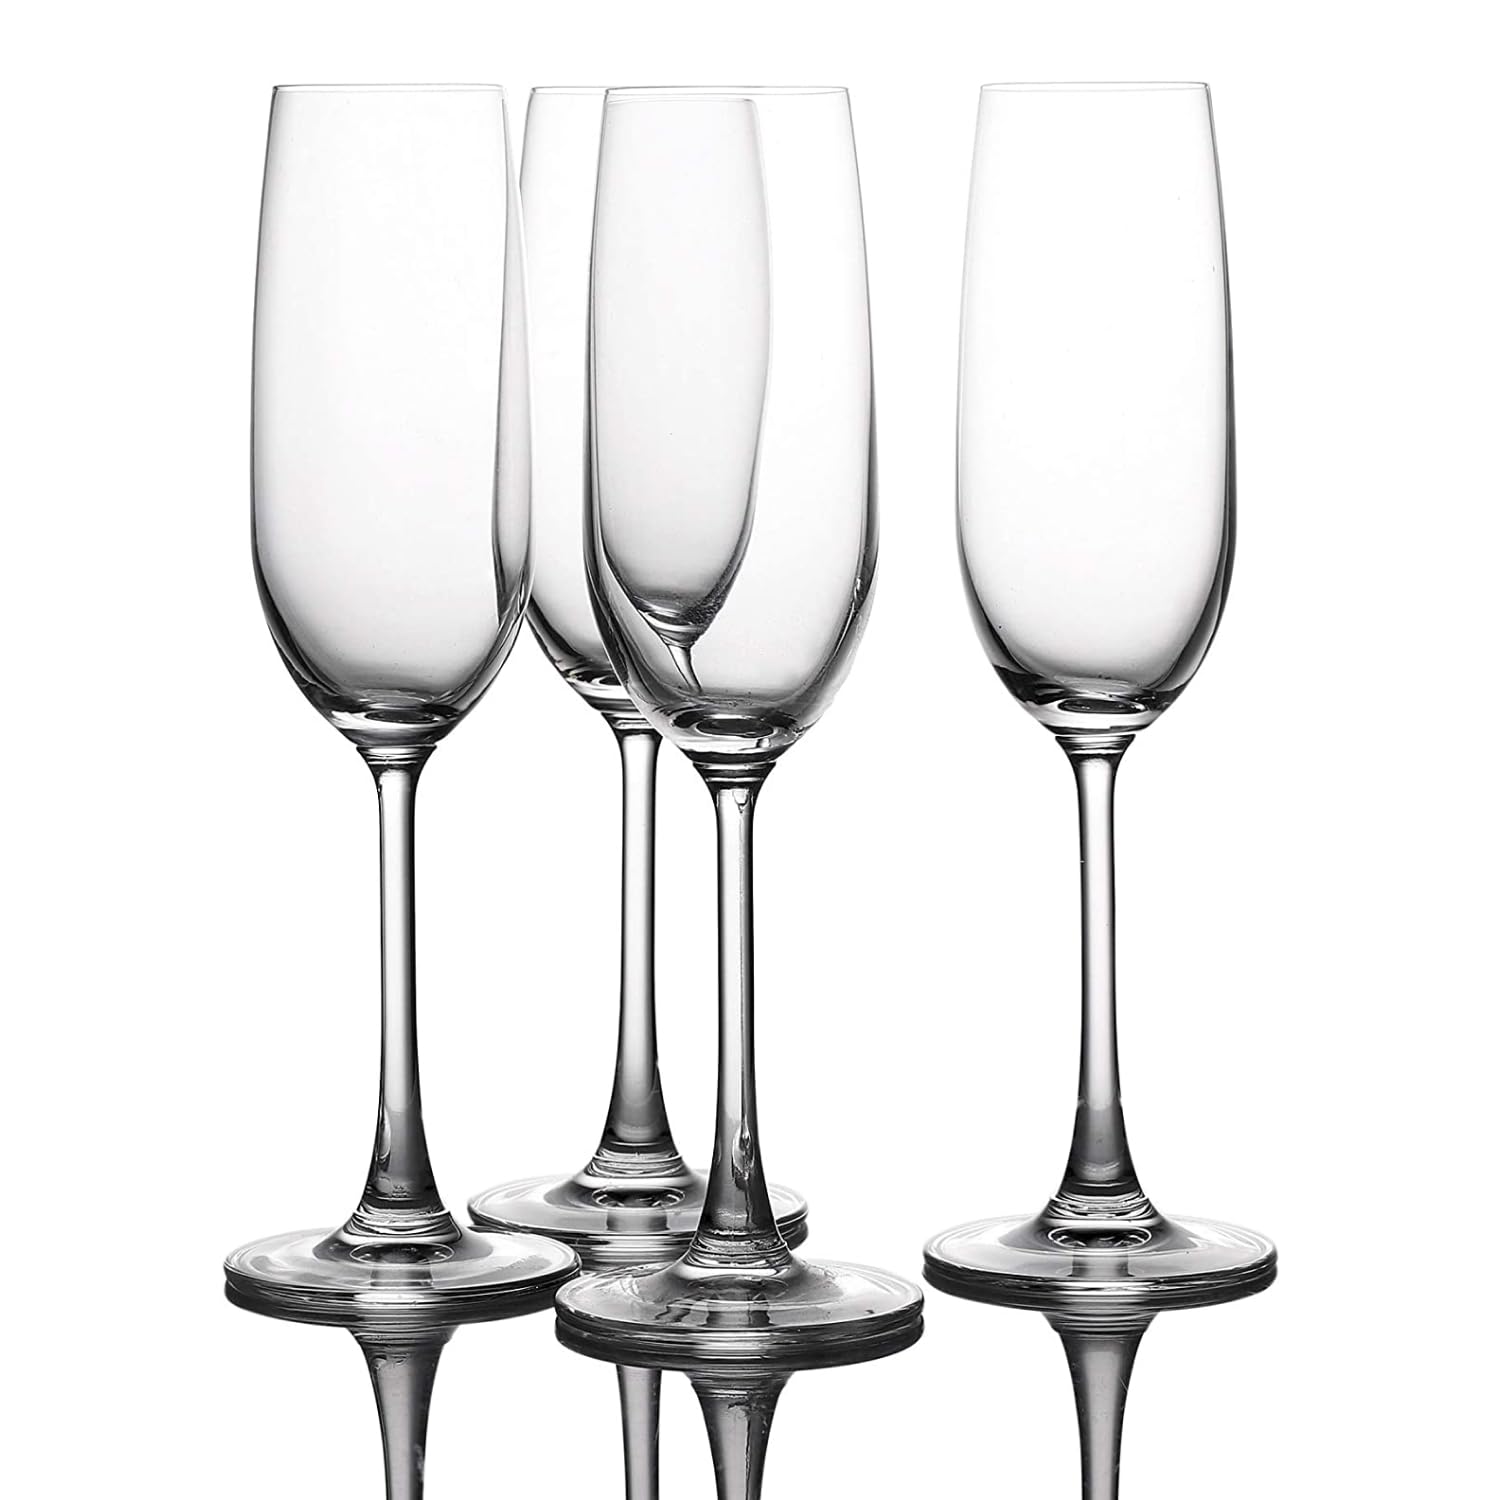 WHOLE HOUSEWARES | Champagne Flute Set of 4 | Hand Blown Italian Style Crystal Clear Glass with Stem | Lead-Free Premium glasses as gift sets (25 oz)